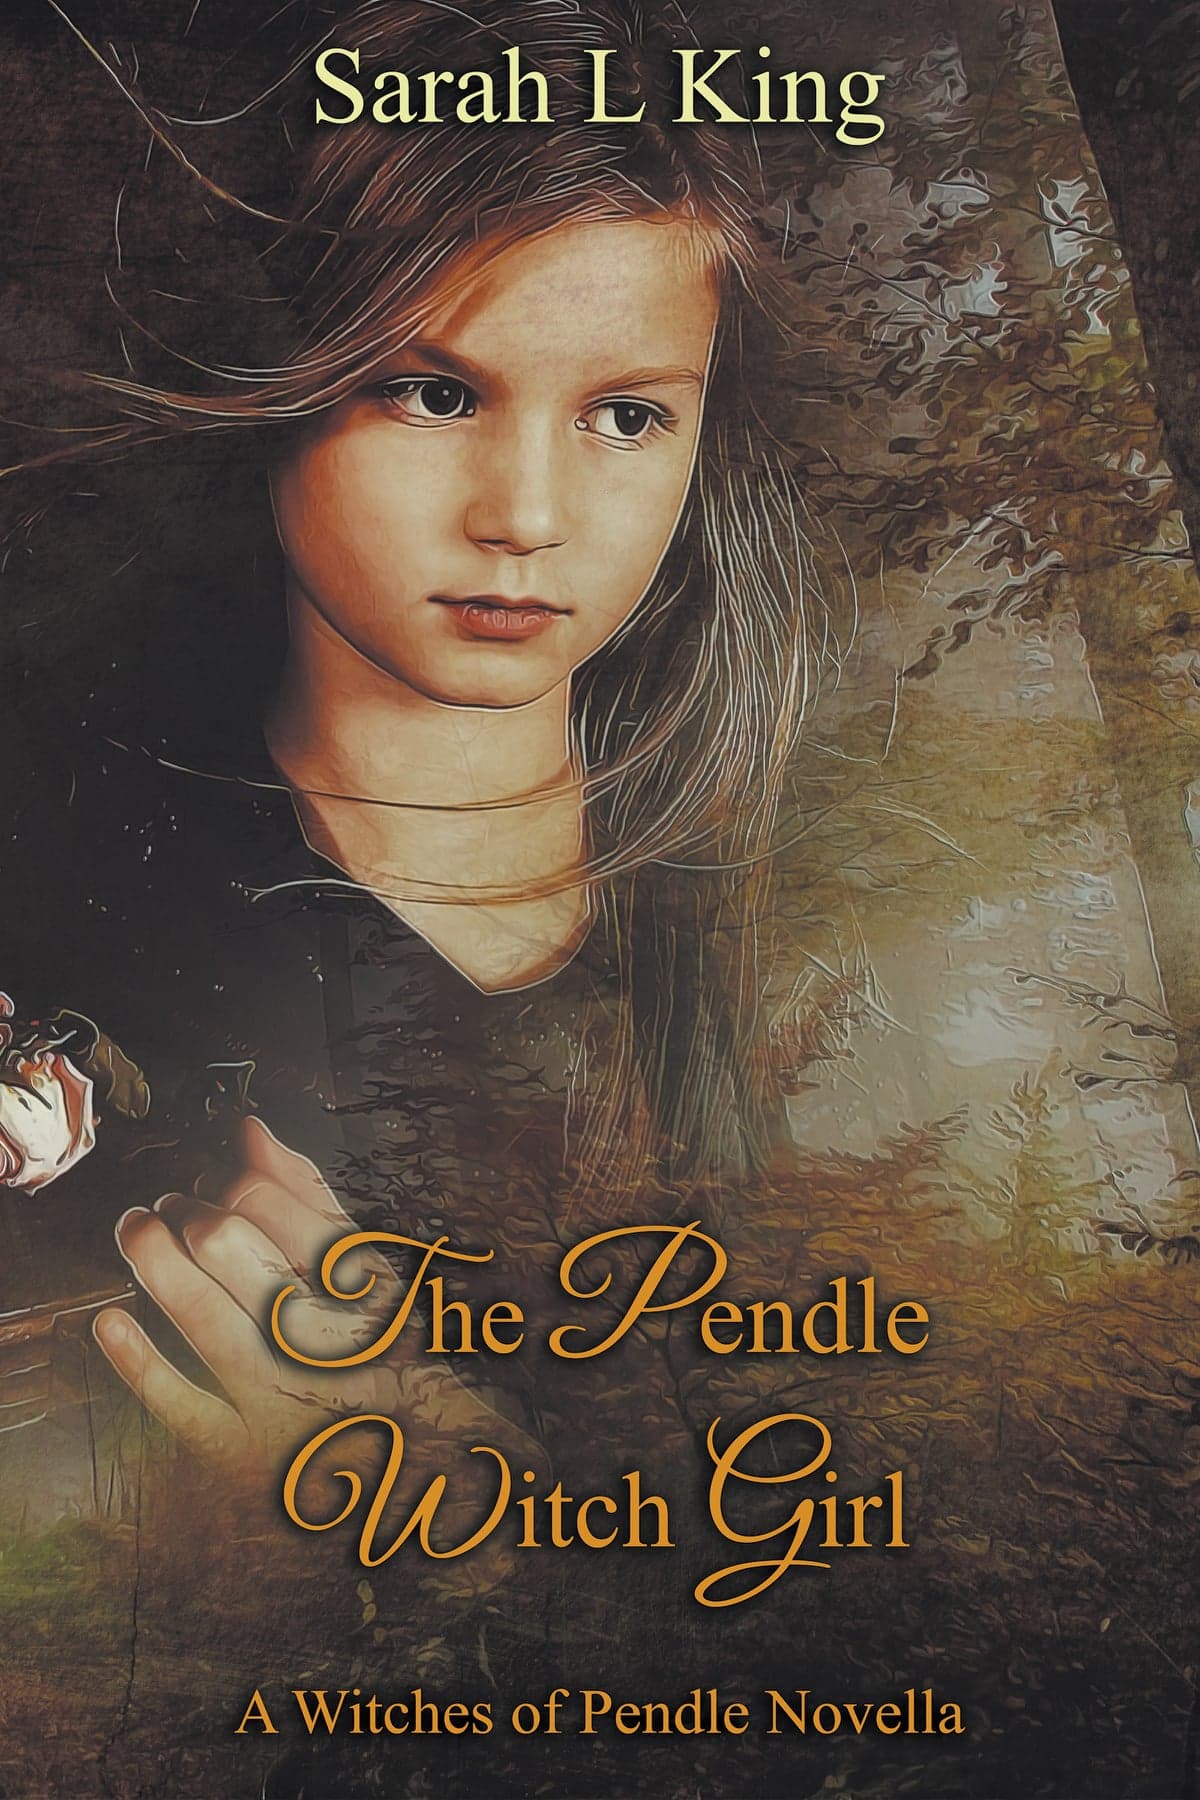 The Pendle Witch Girl